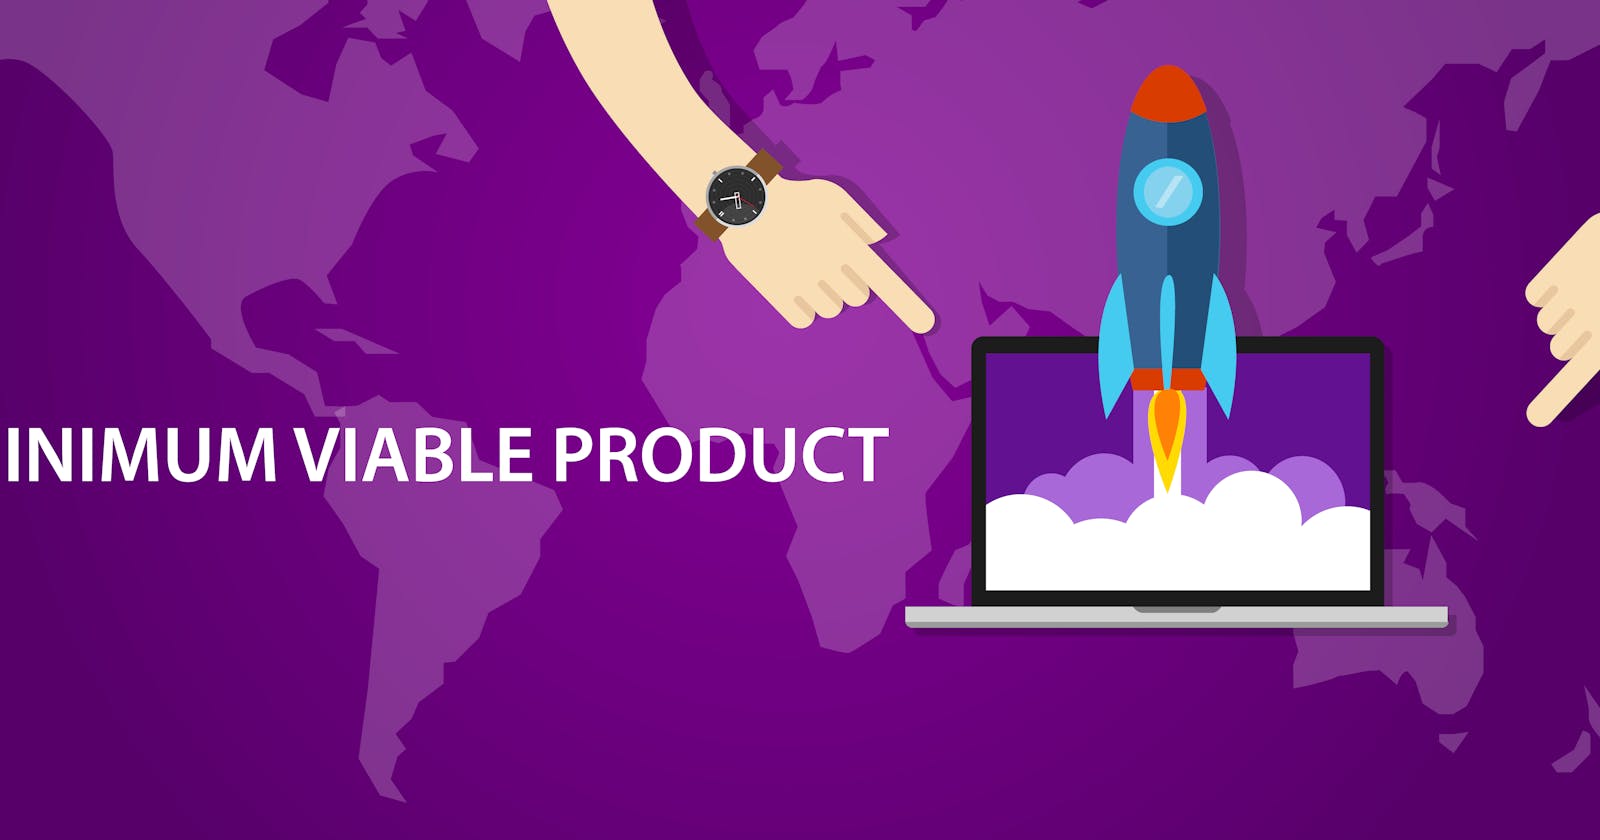 What is Minimal Viable Product (MVP)?